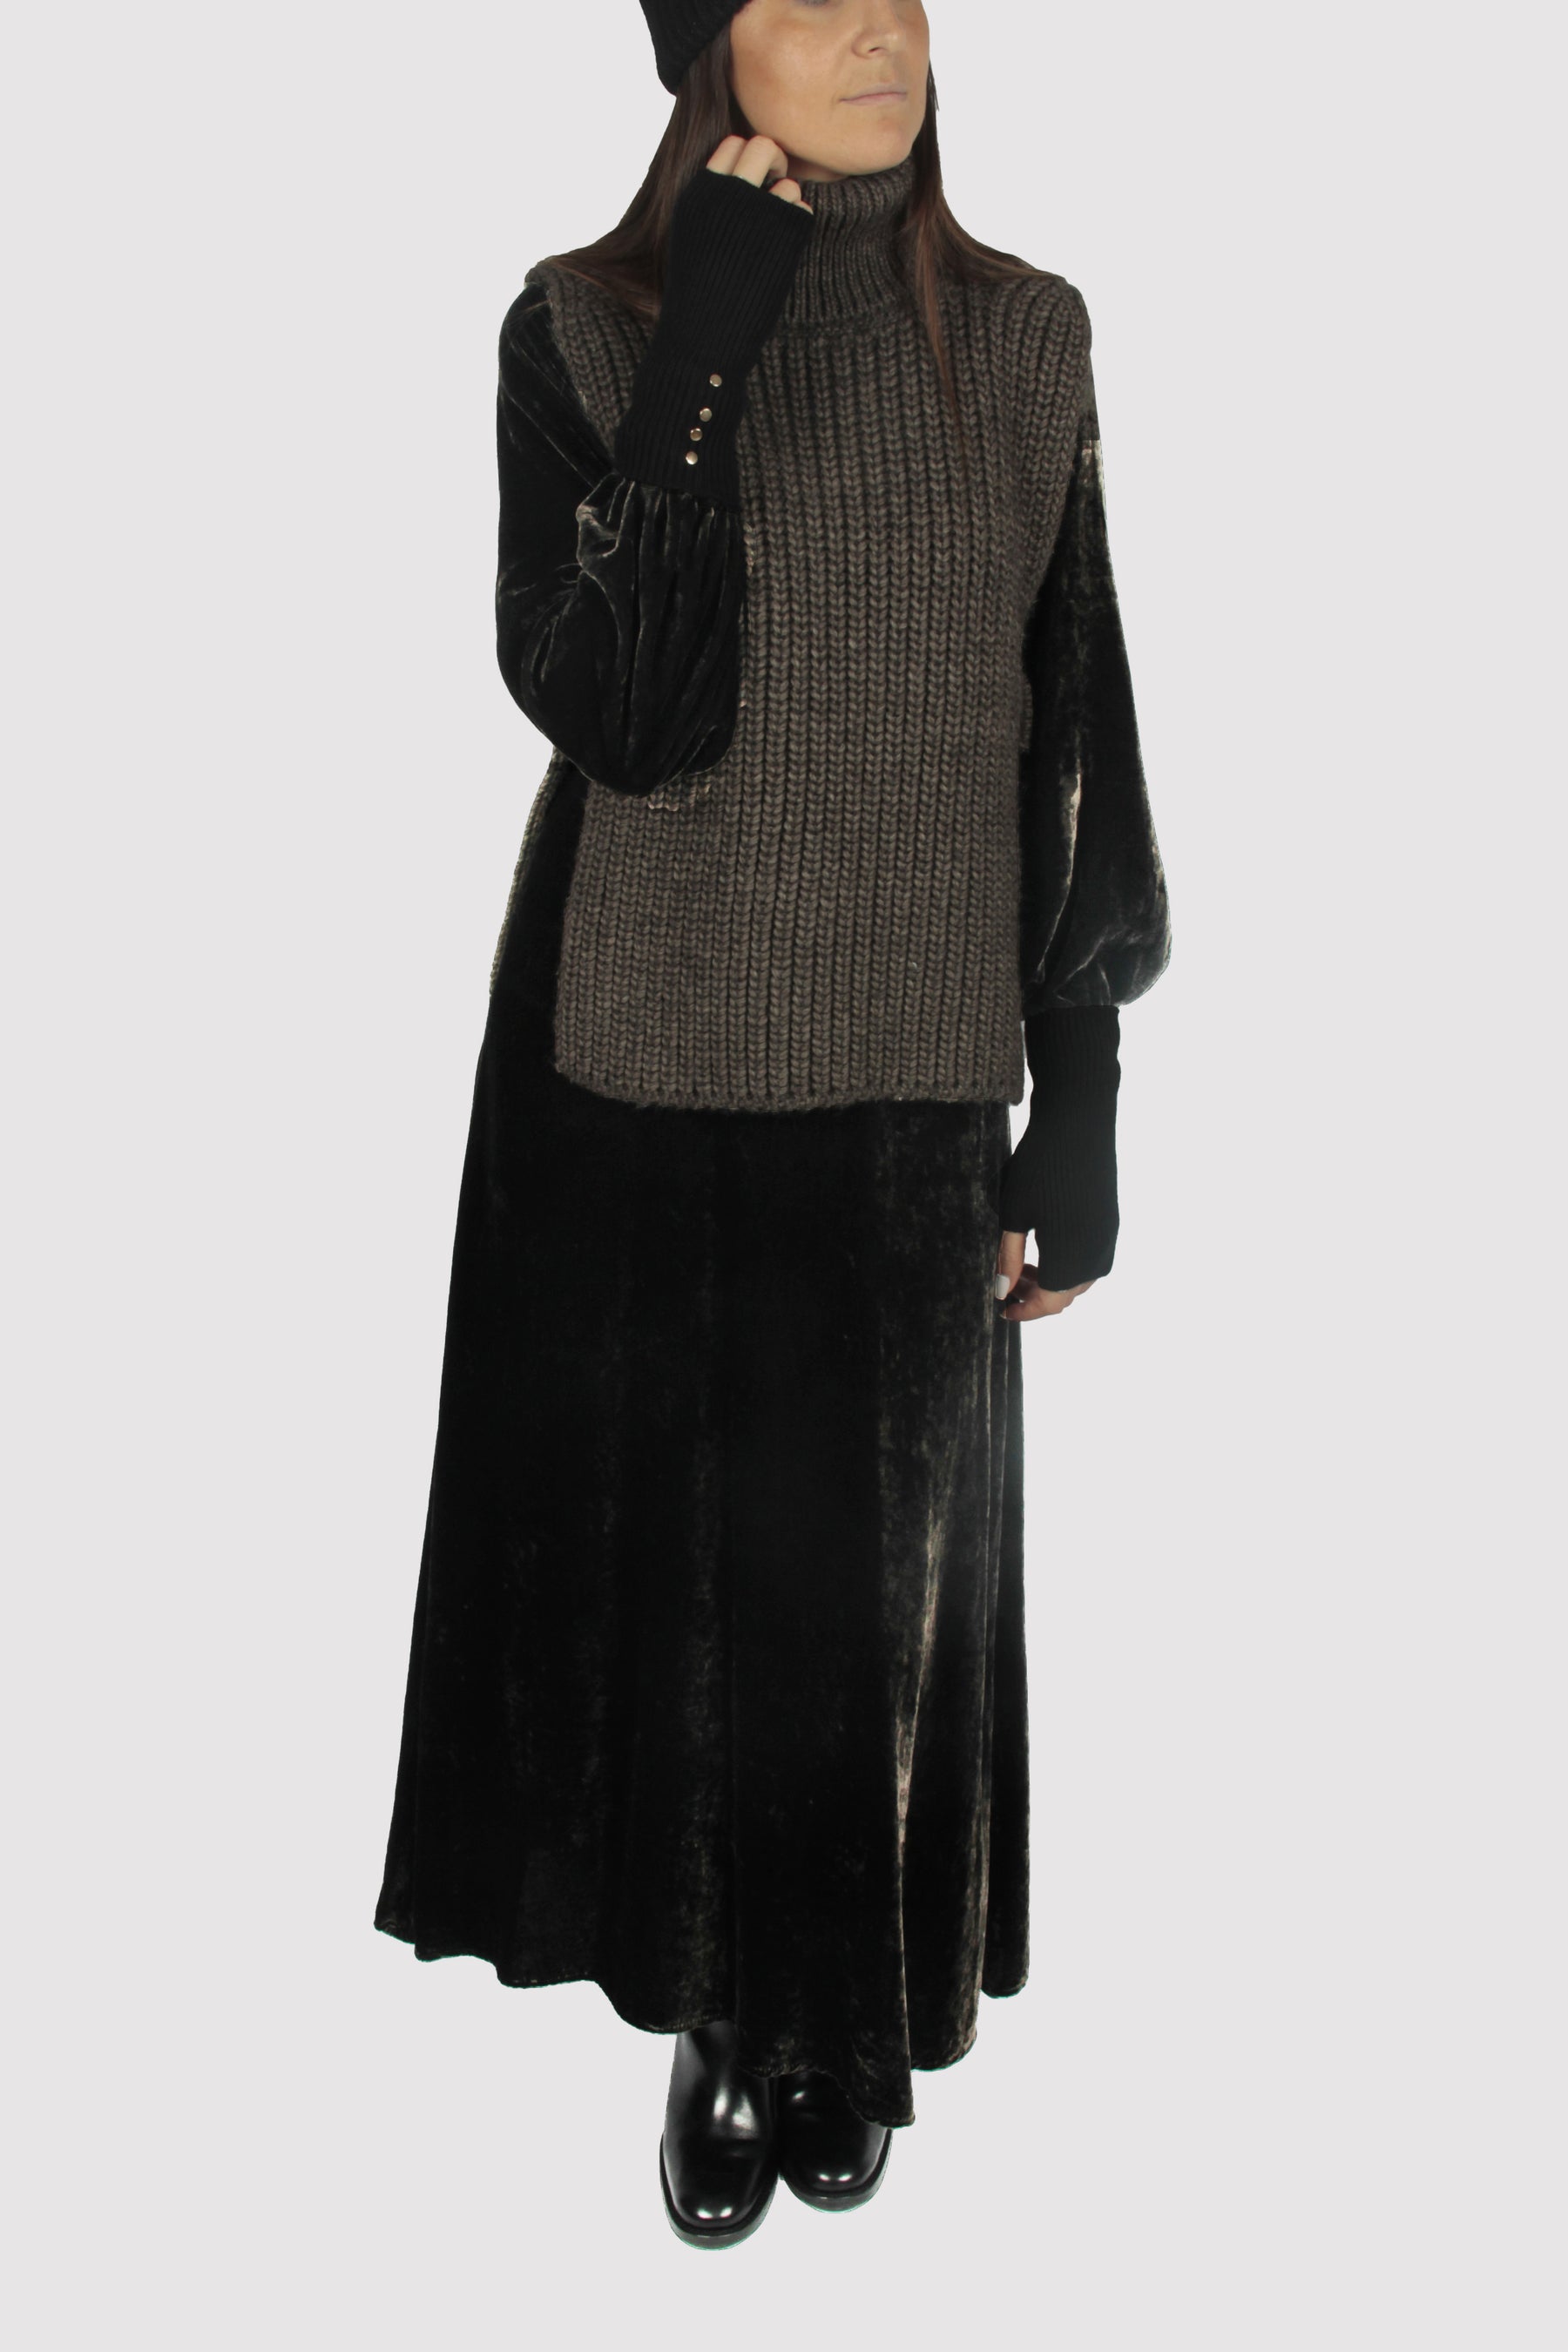 ISIS KNITTED PONCHO SWEATER